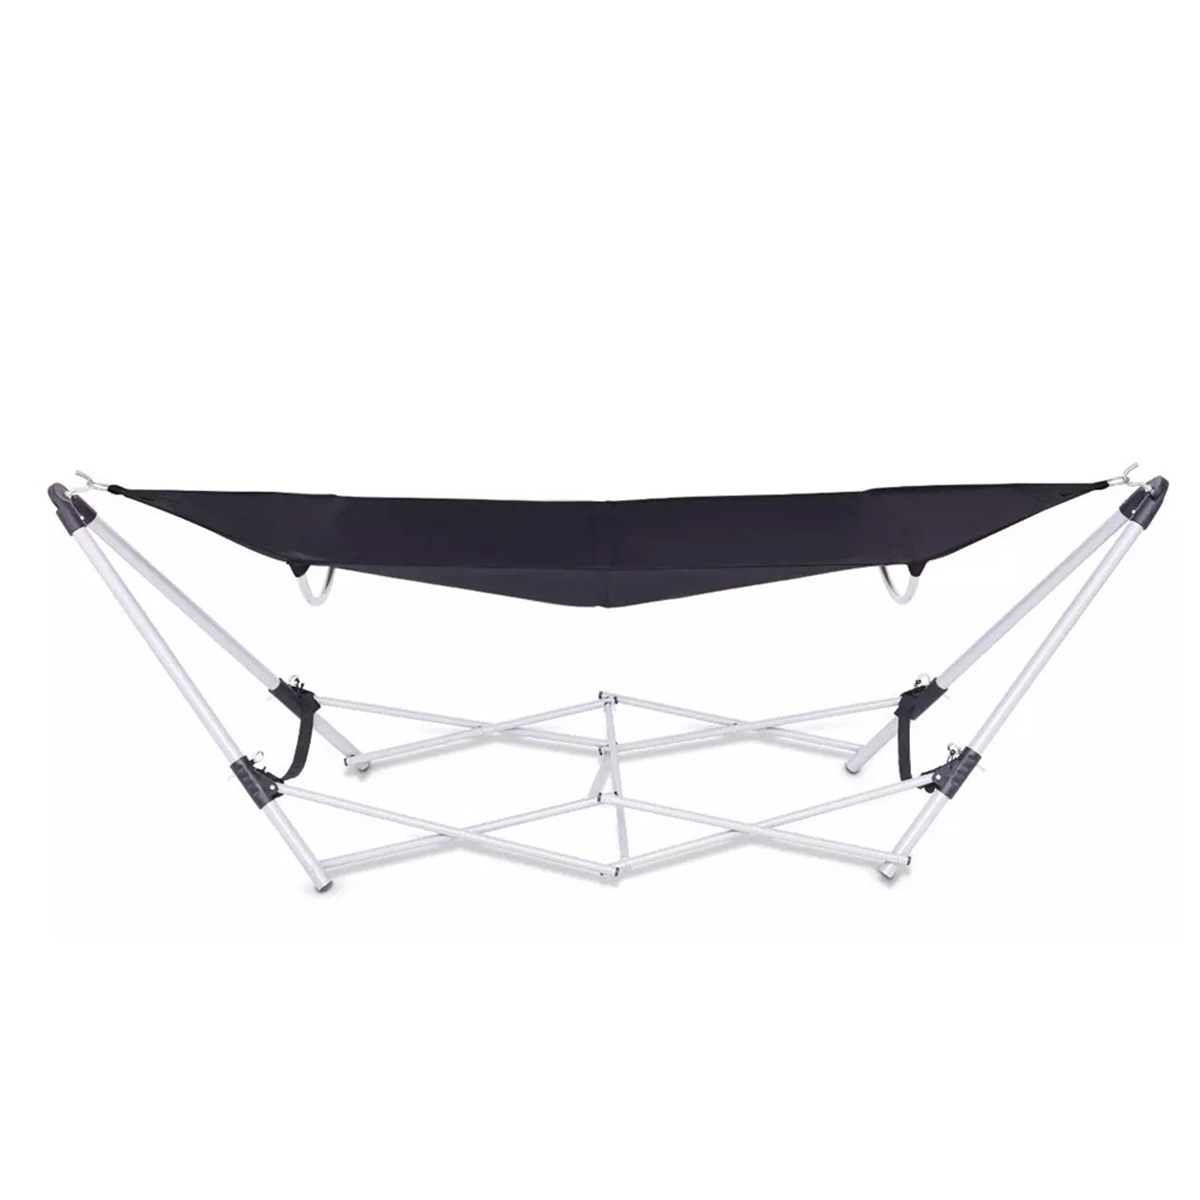  Portable Folding Hammock Lounge Camping Bed Steel Frame Stand (ESG19180)